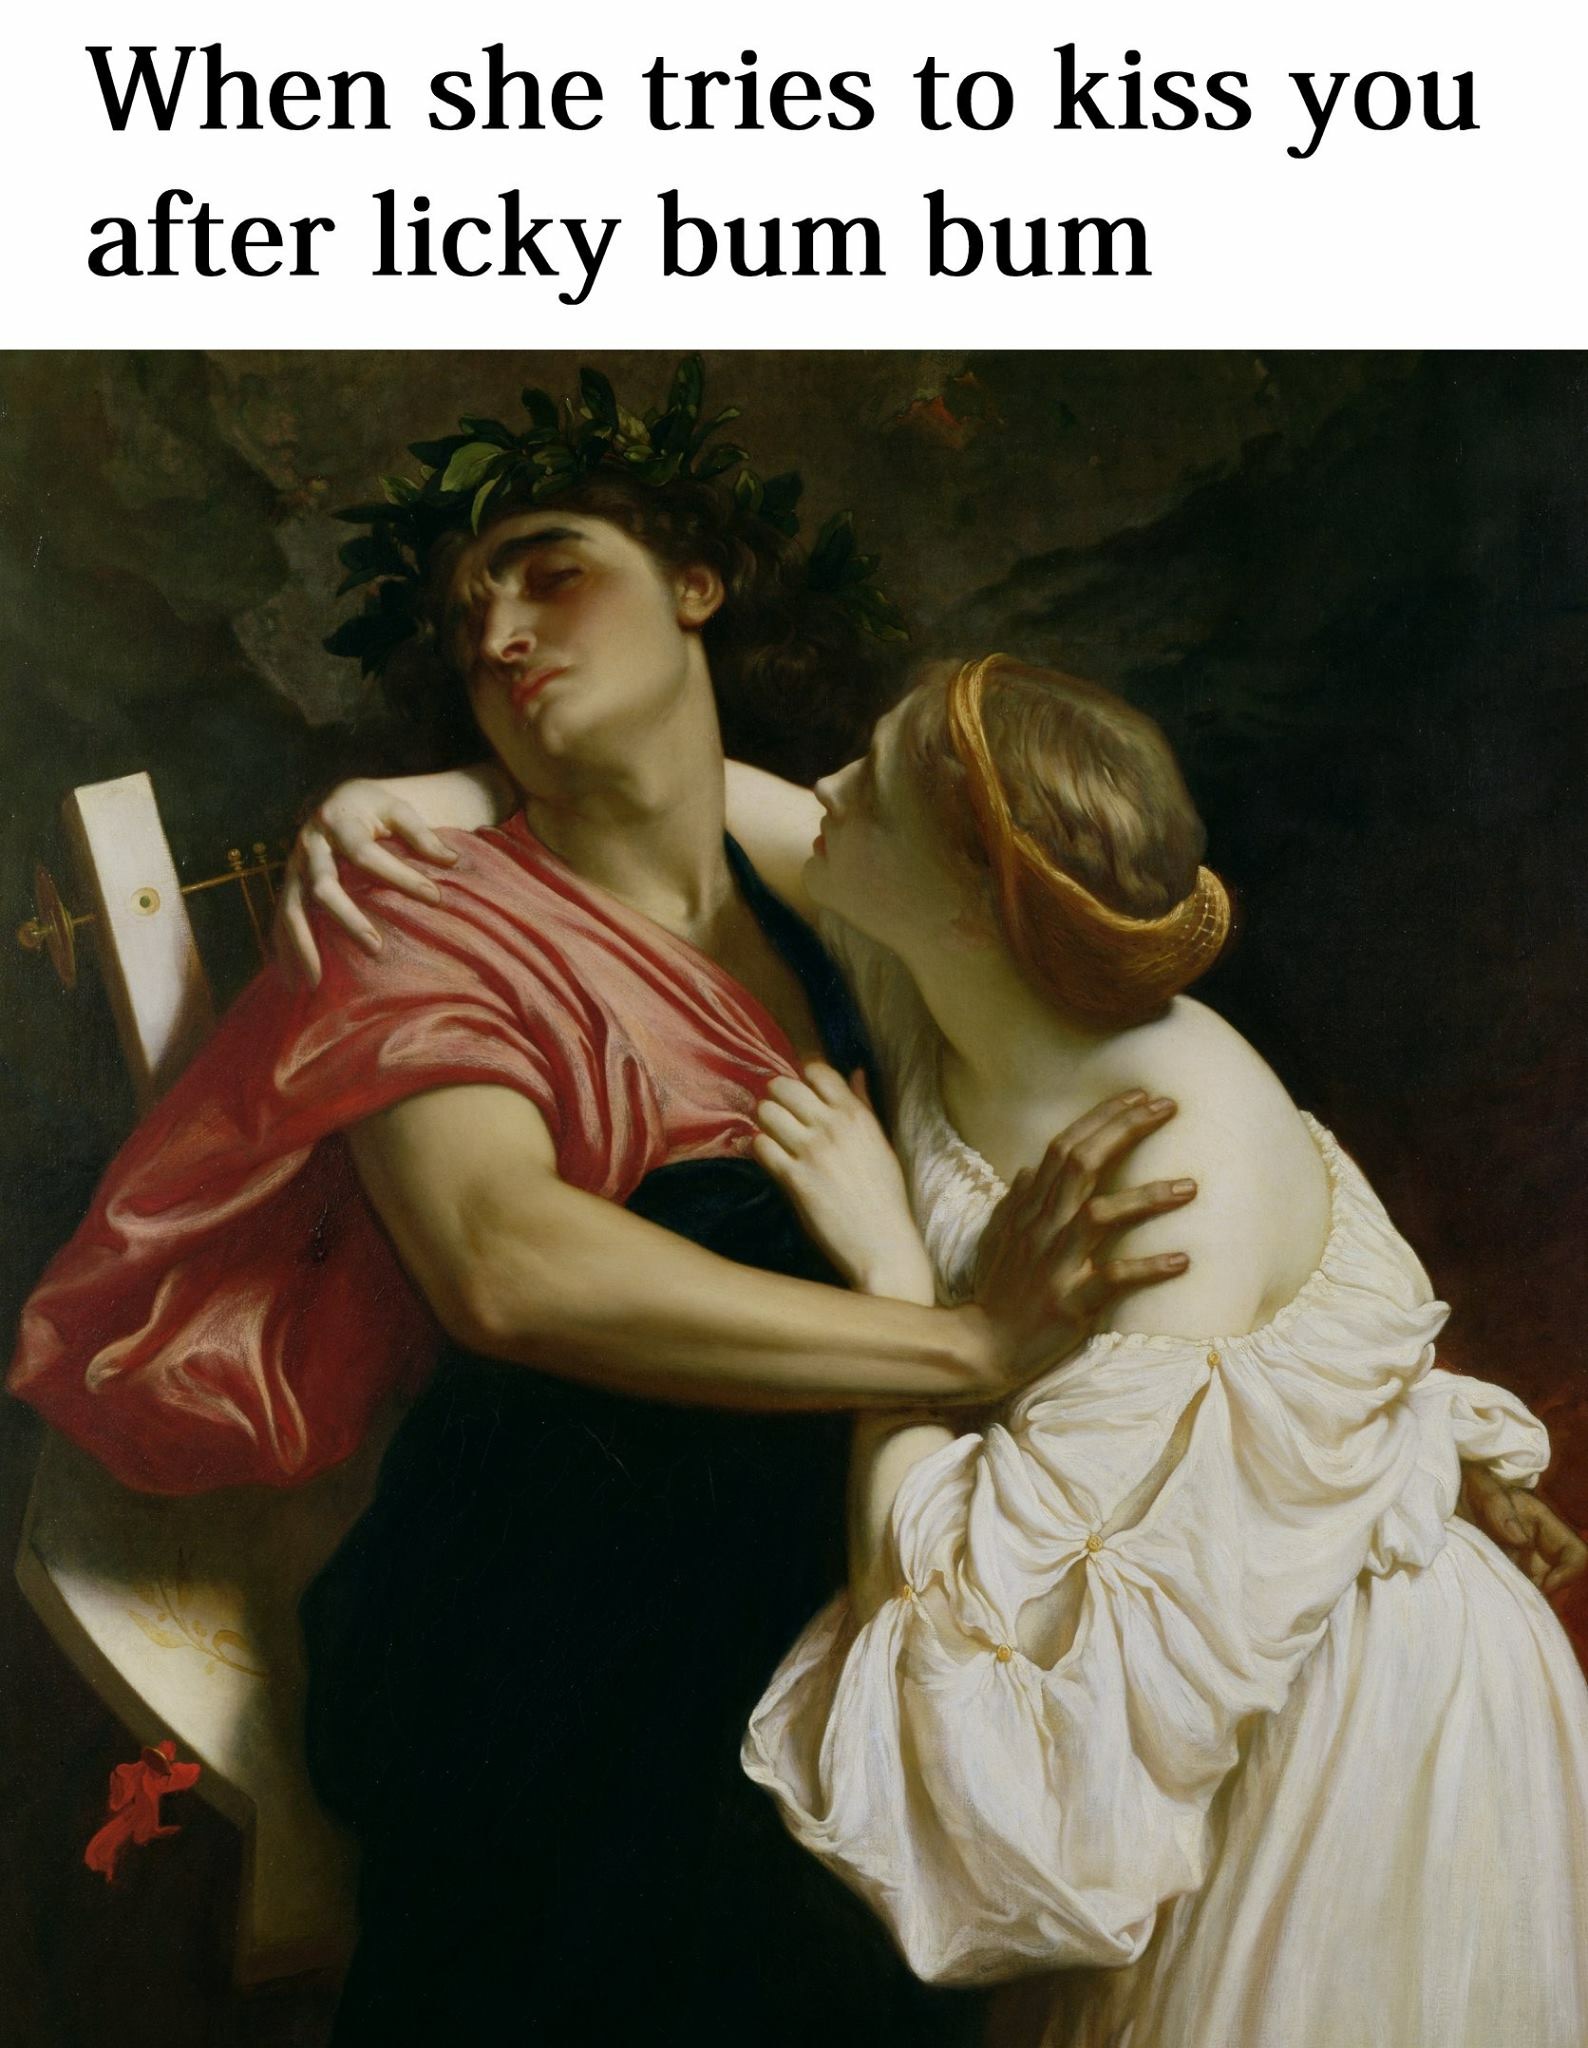 No Kissing After Licky Bum